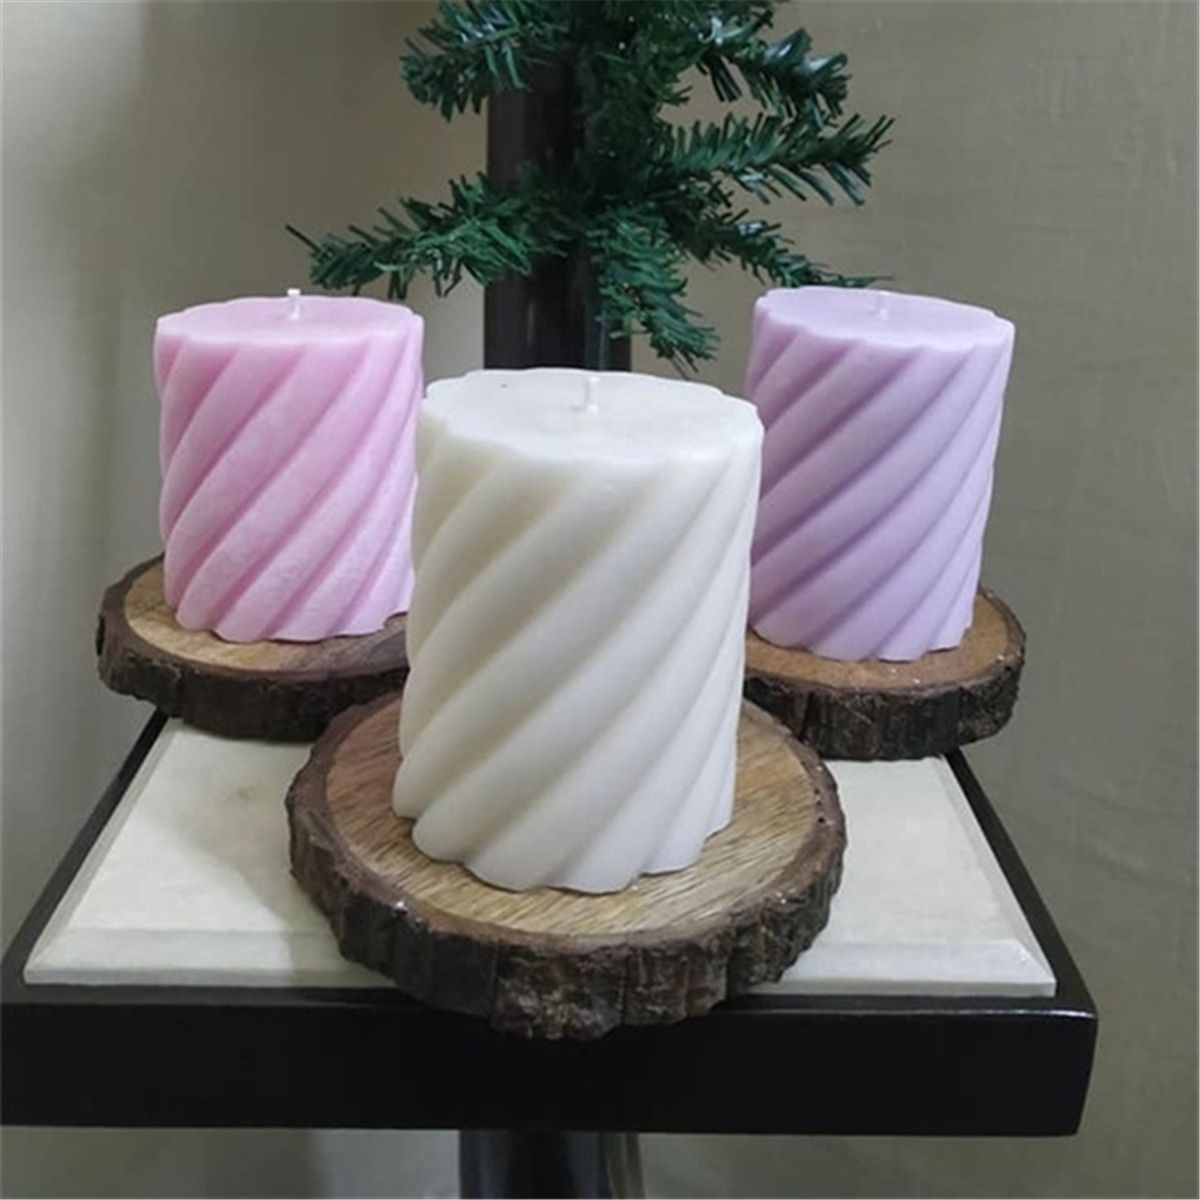 Candle-Mold-Plastic-Spiral-Shape-DIY-Craft-Tool-For-Wax-Candle-Mould-Making-1527730